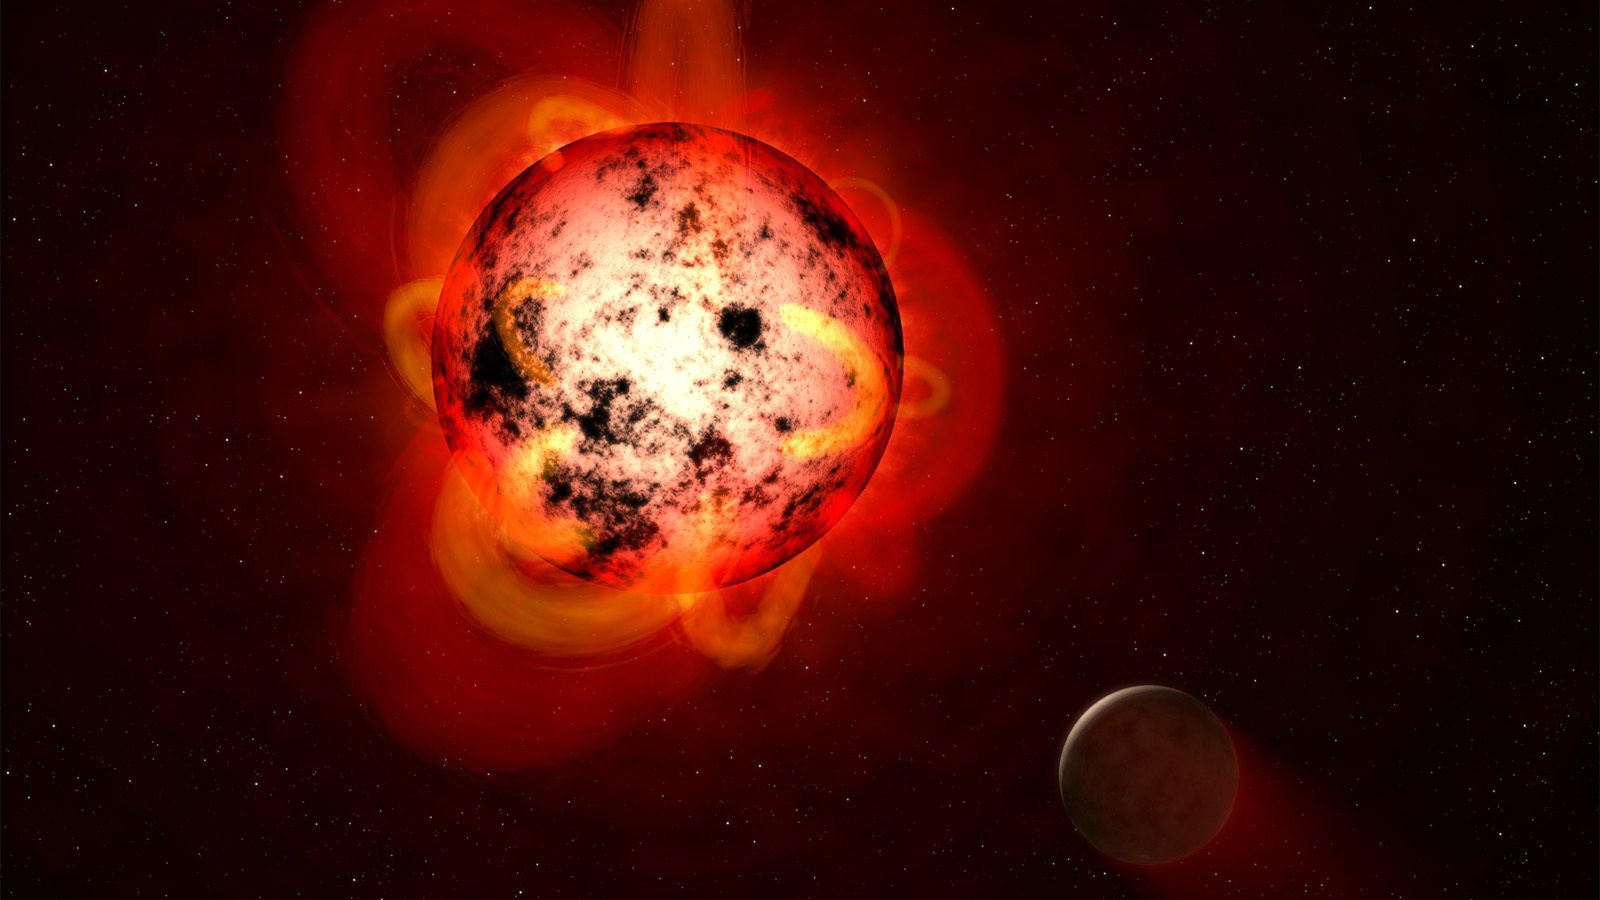 Illustration of red dwarf star and its planet.